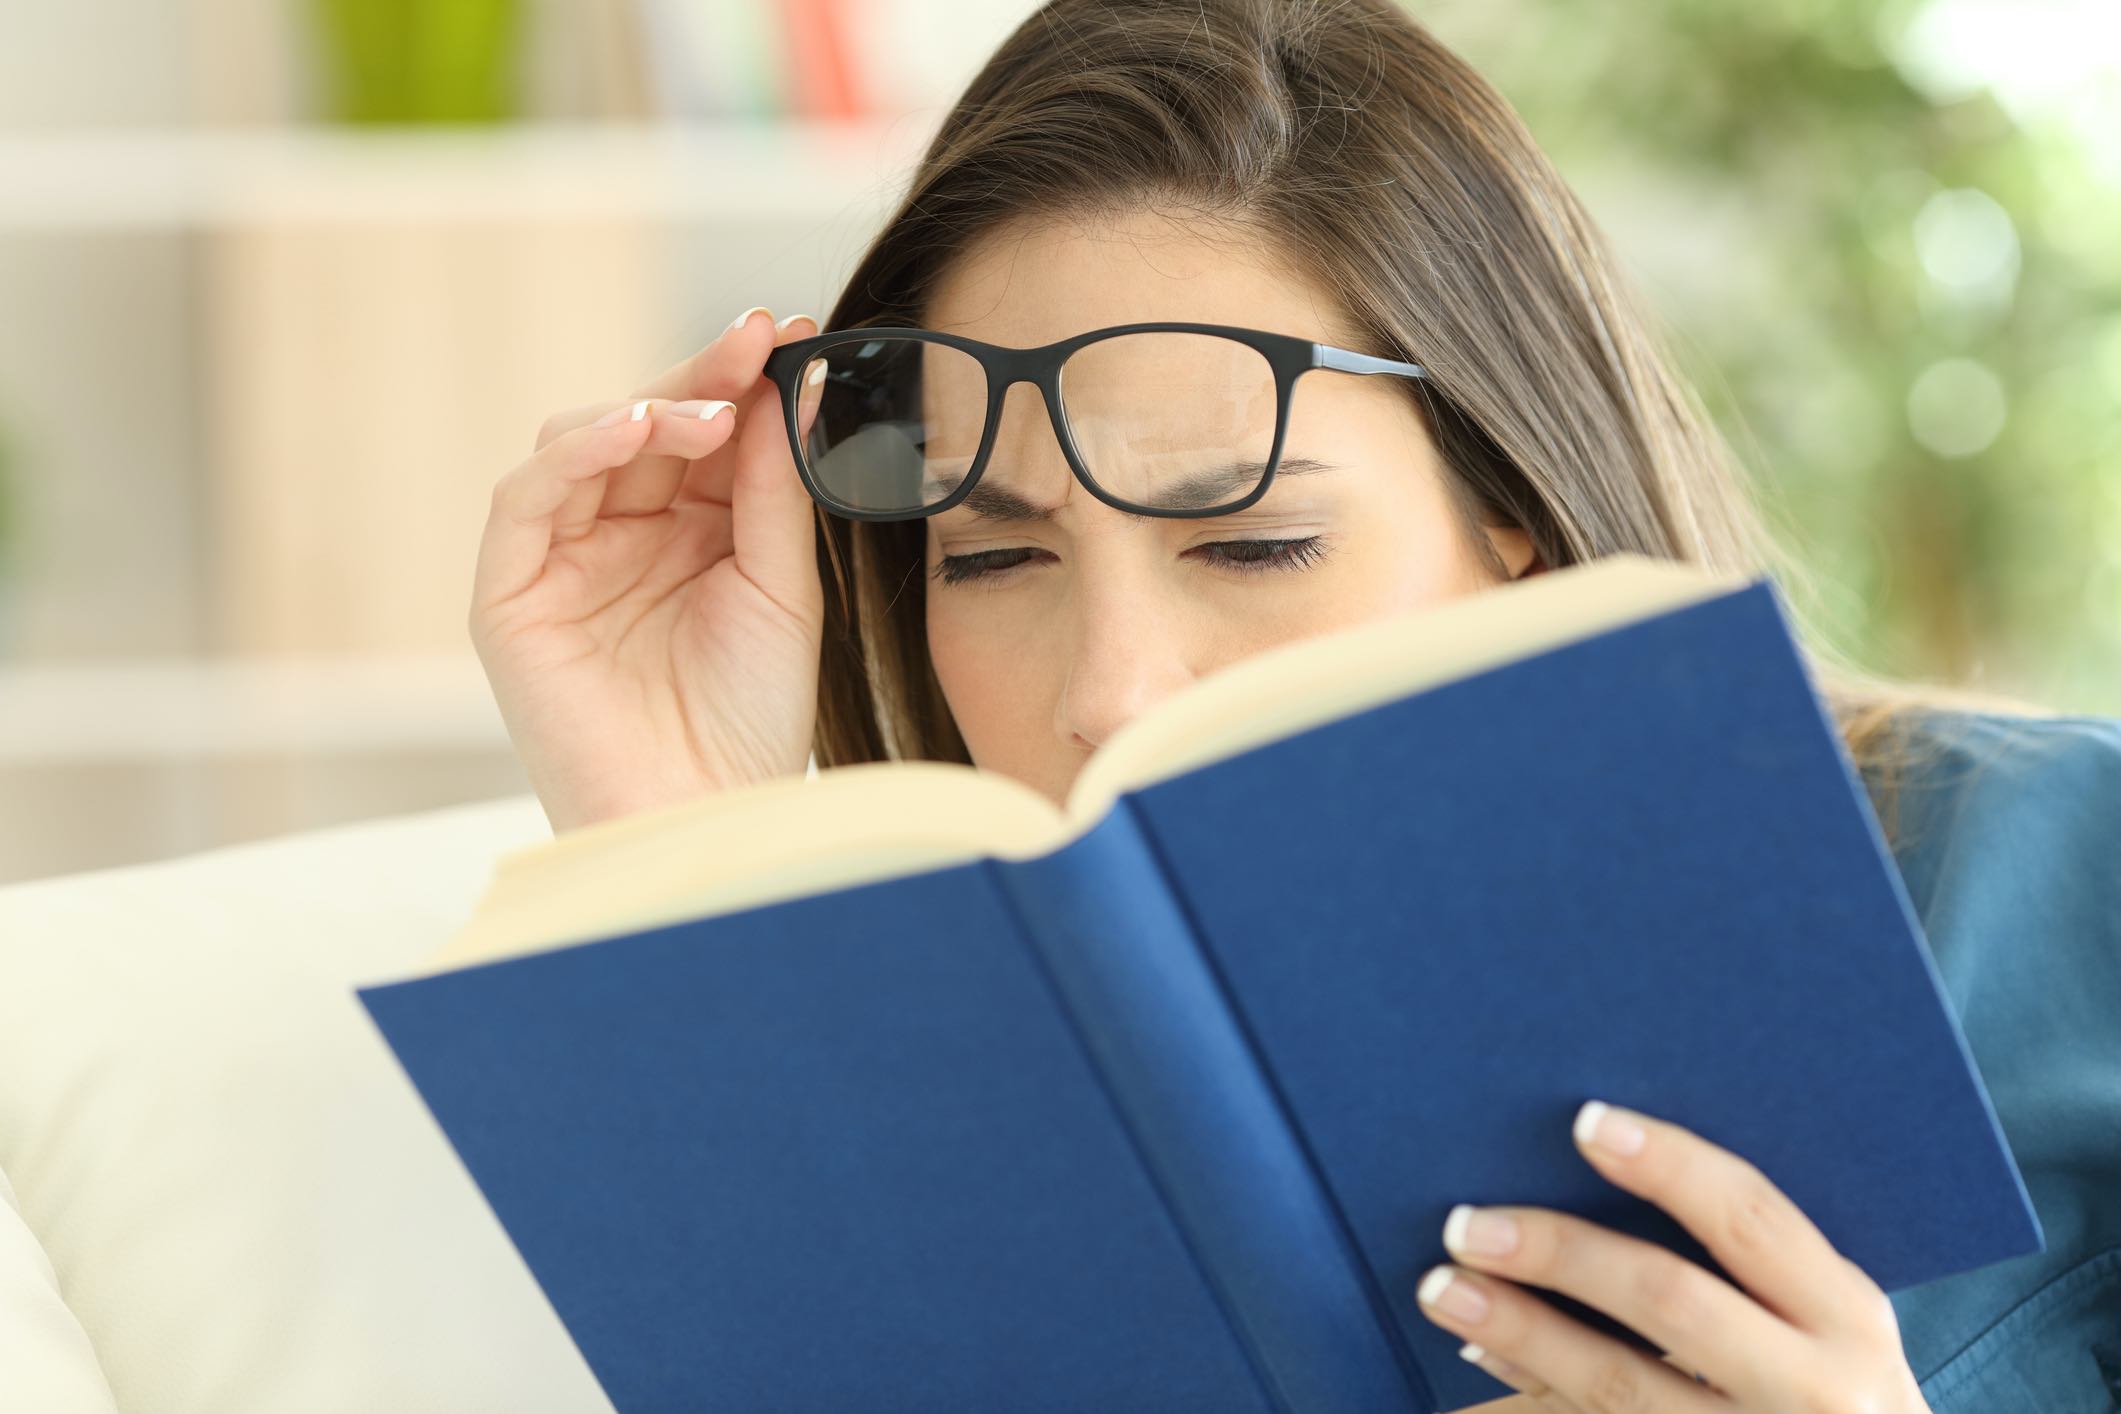 lady who is reading a book and having trouble ready while lifting her glasses to see clearer